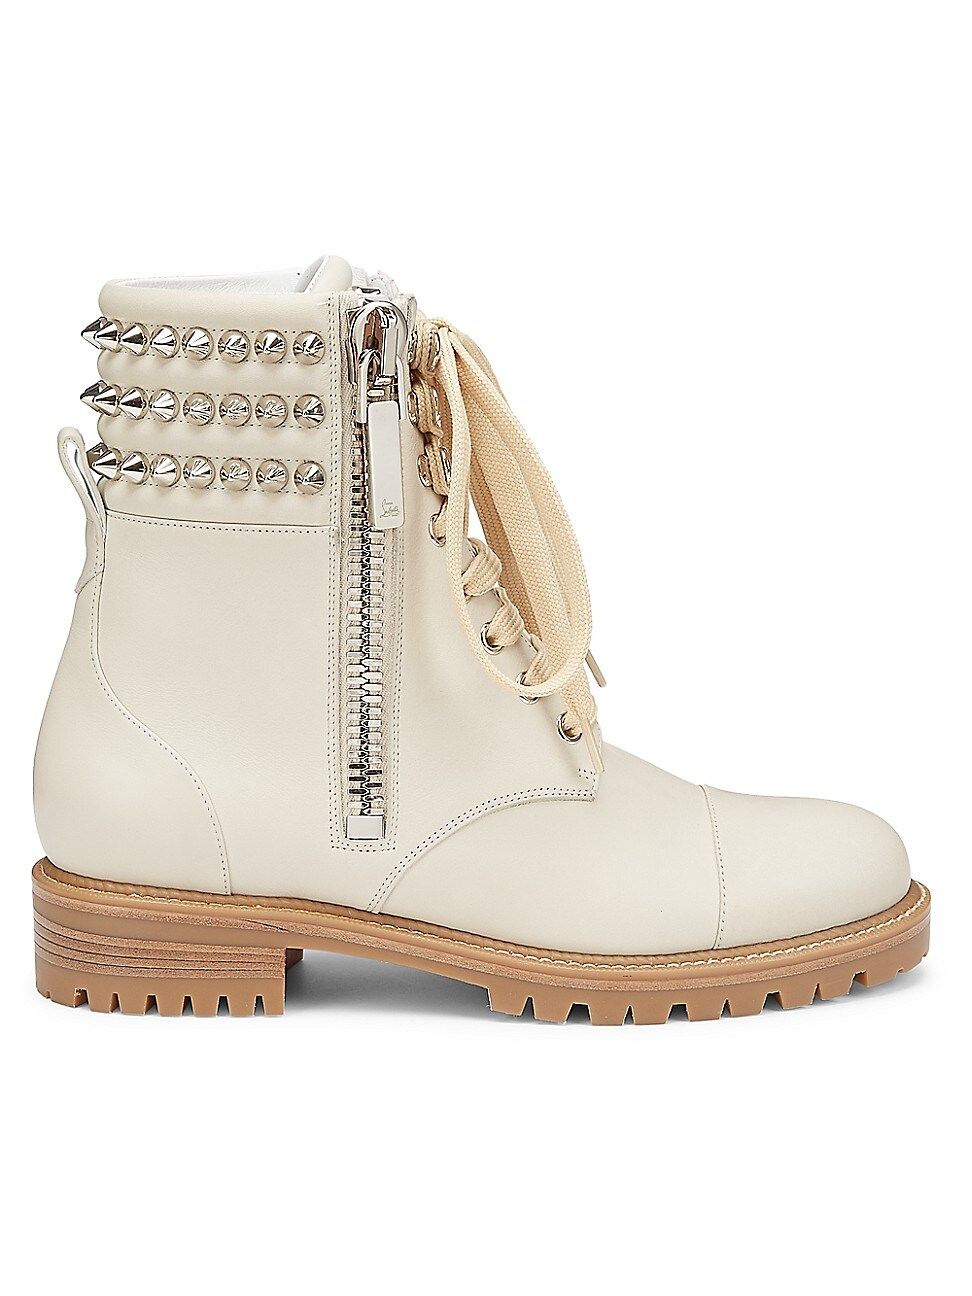 Christian Louboutin Women's Winter Spiked Leather Combat Boots - White - Size 36 (6) | Saks Fifth Avenue